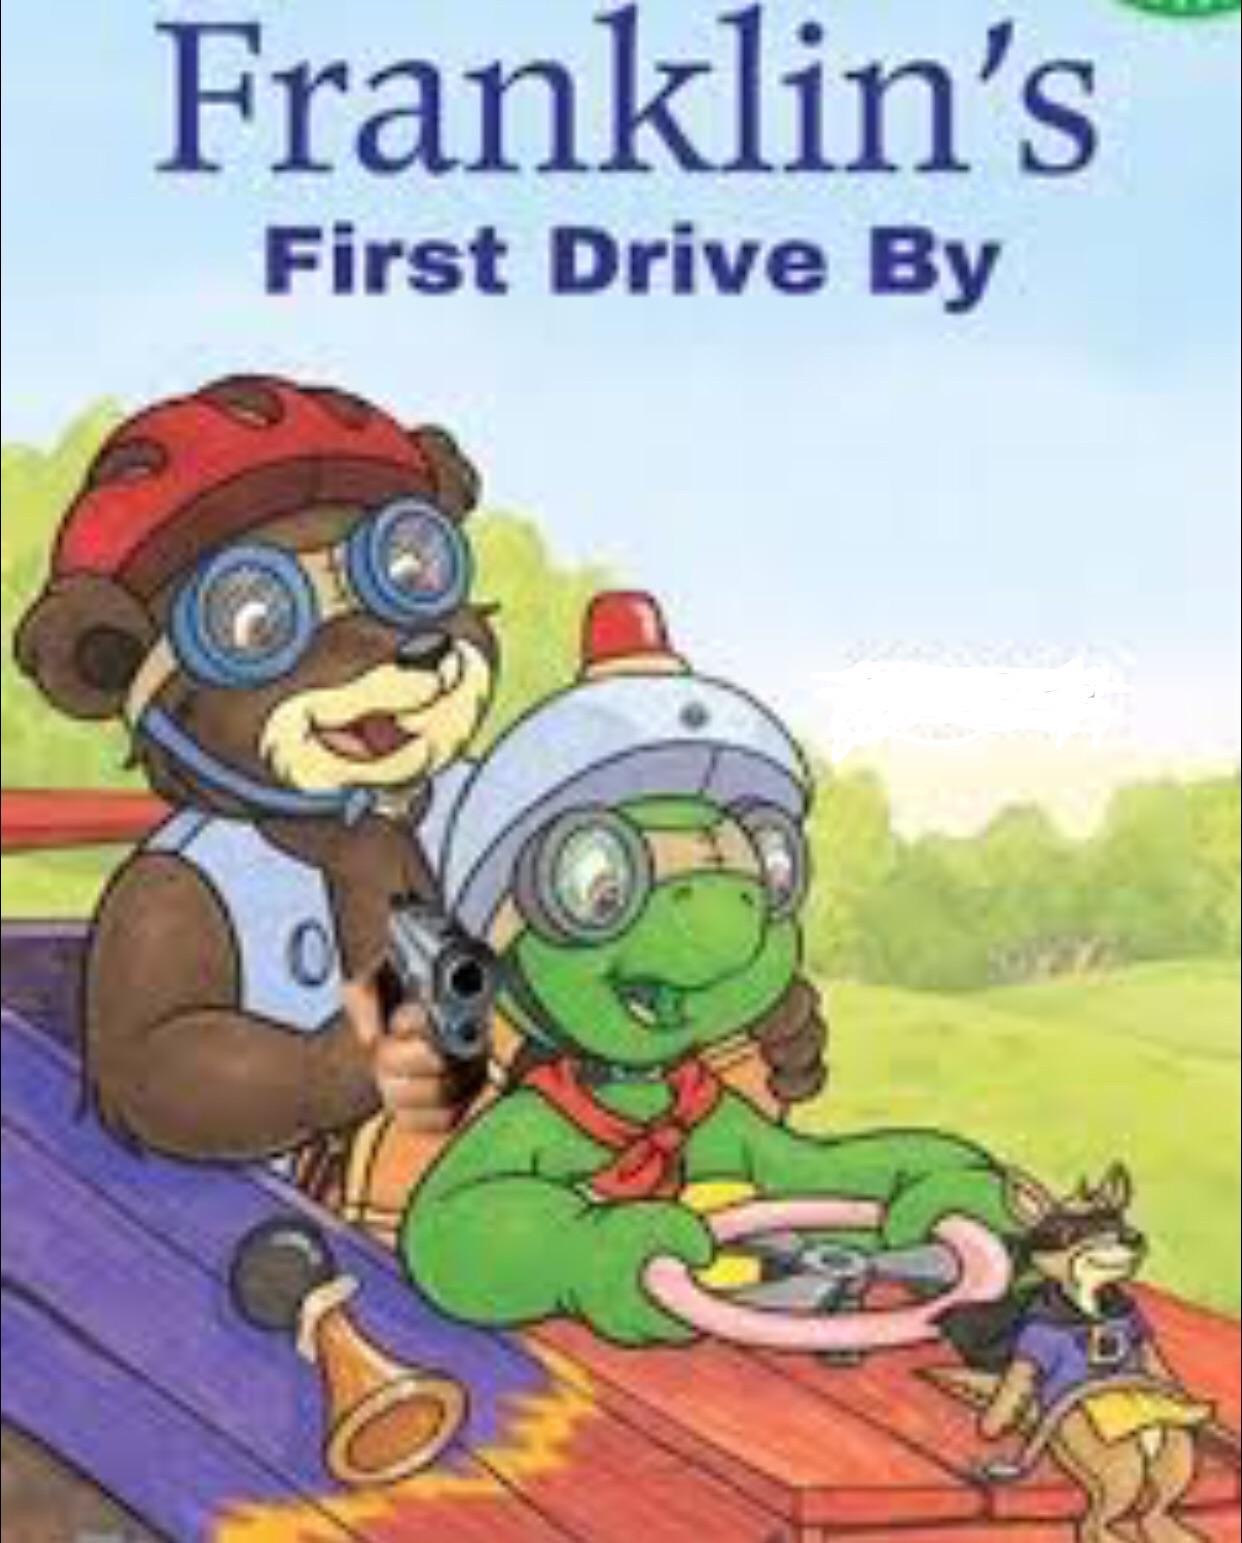 franklin violates his restraining order meme - Franklin's First Drive By